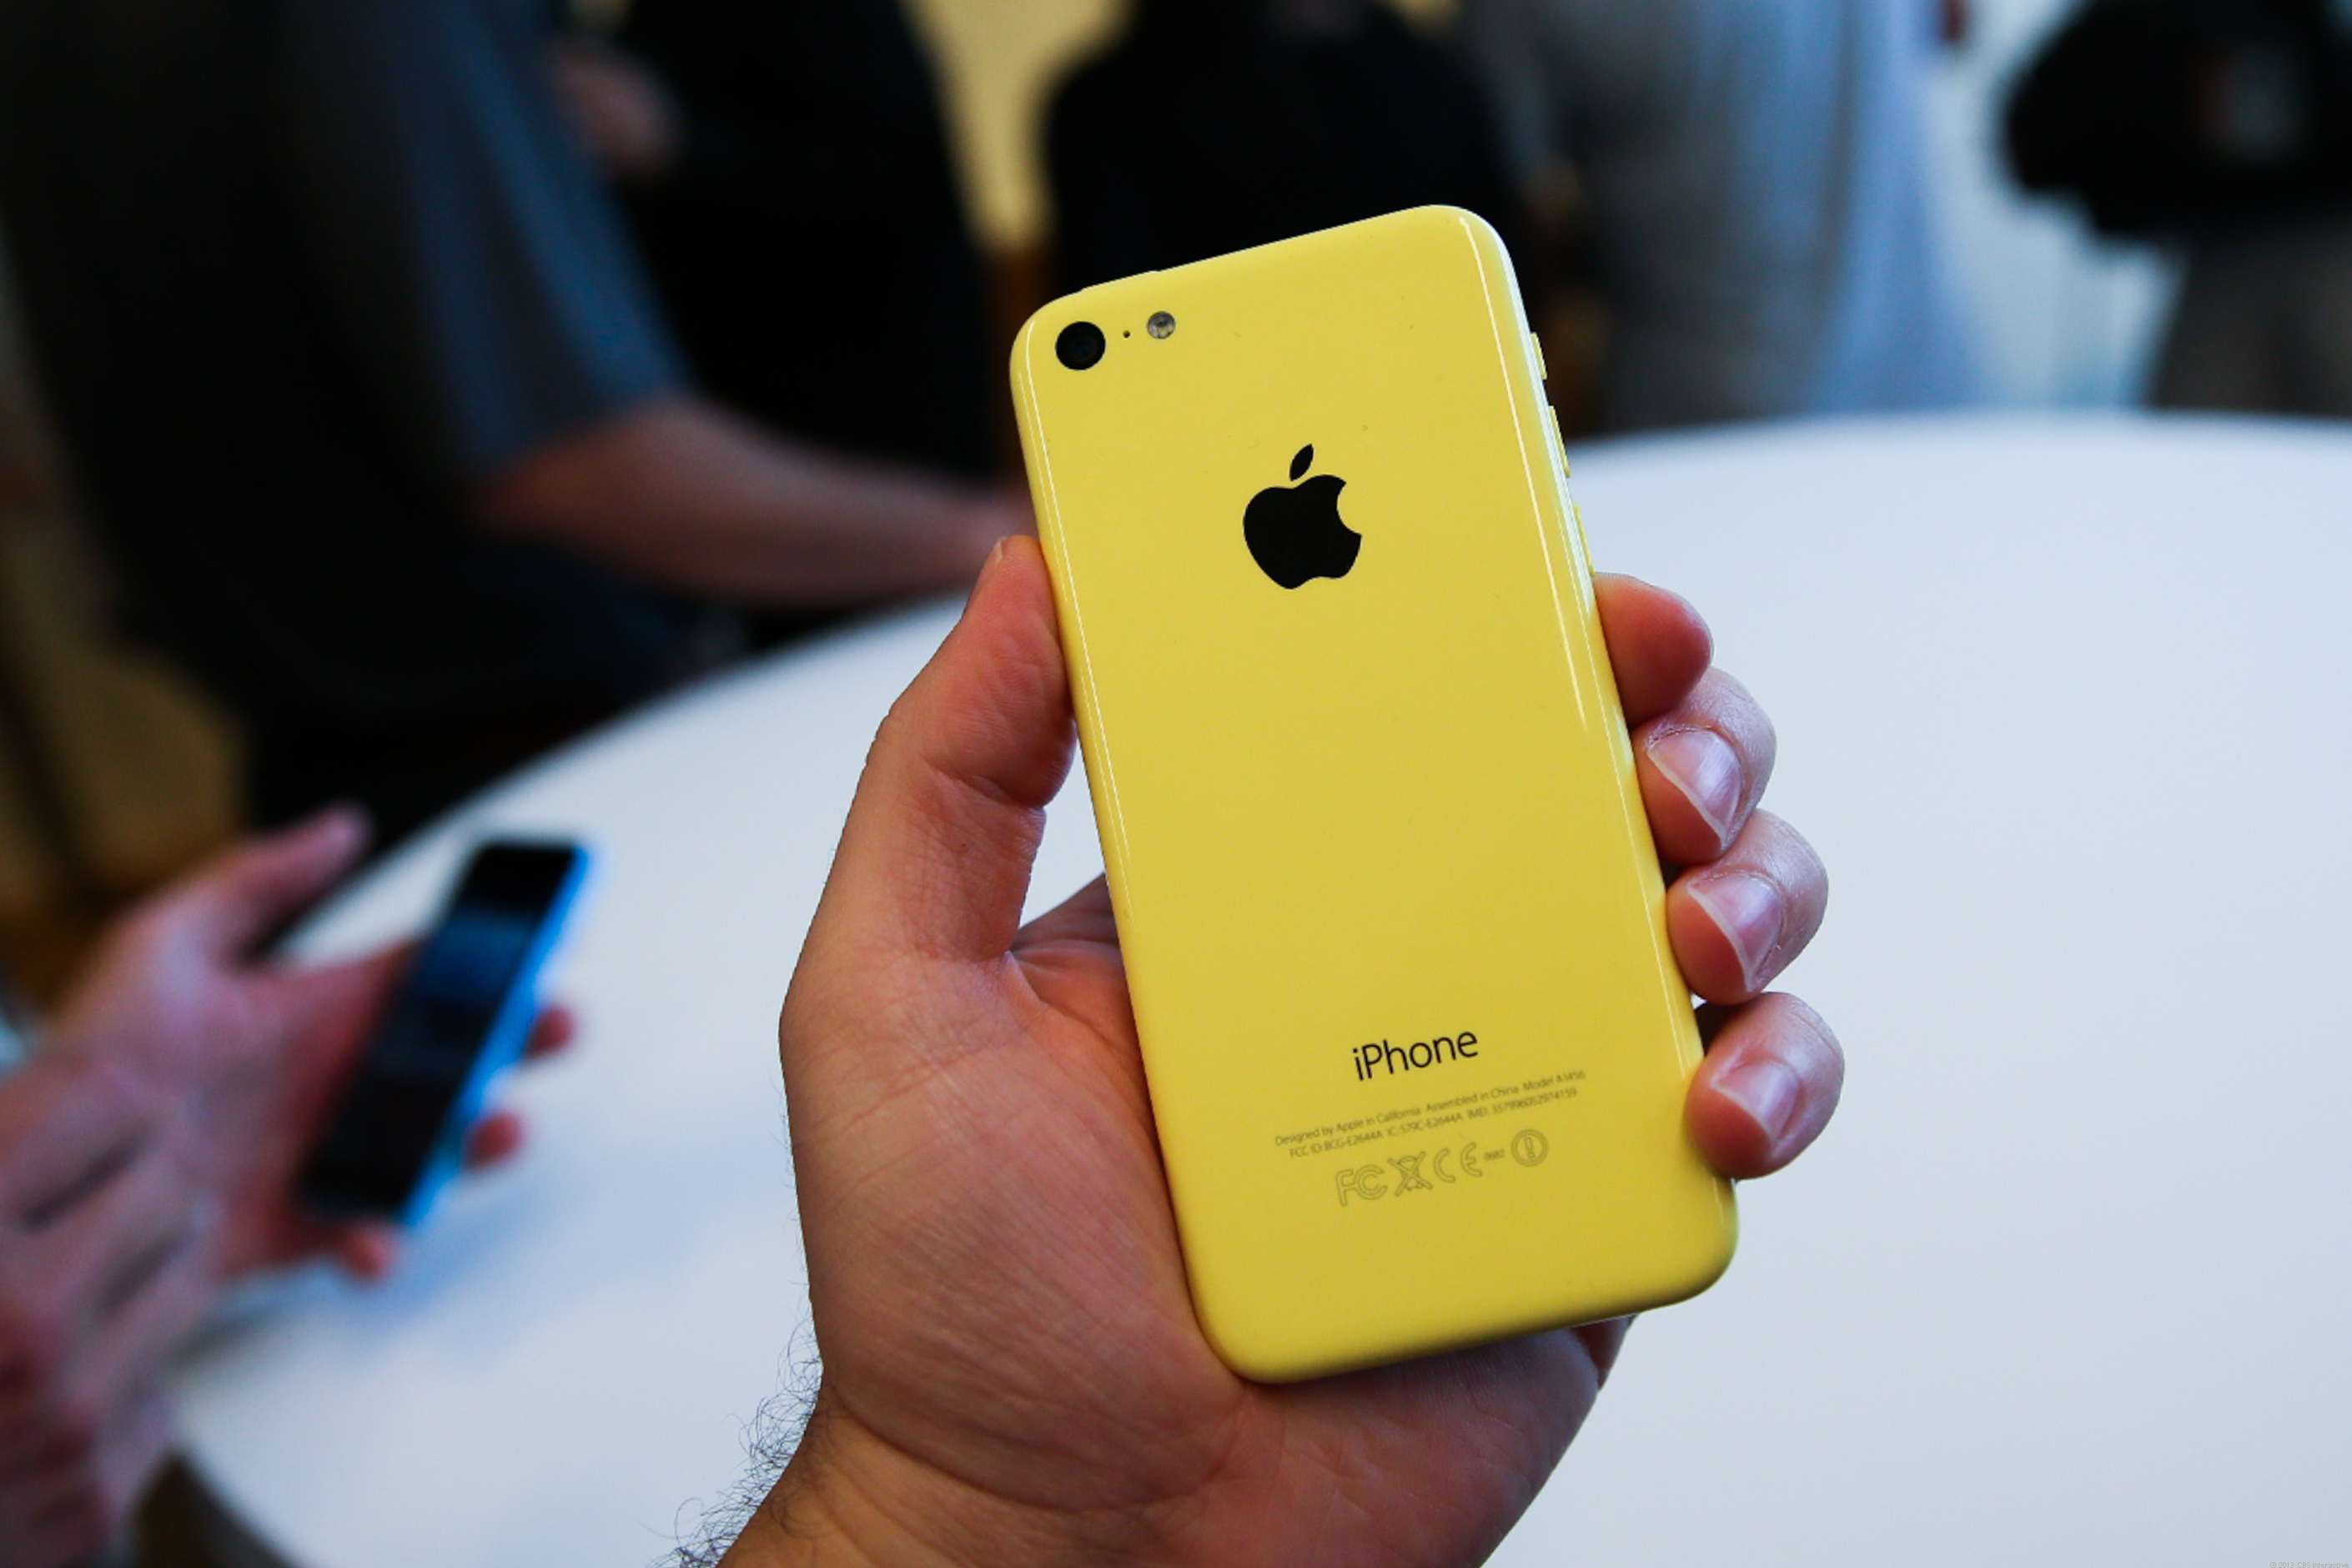 Free Download Yellow Iphone 5c In Hand Wallpapers And Images Wallpapers Pictures x10 For Your Desktop Mobile Tablet Explore 50 Iphone 5c Yellow Wallpaper Iphone 6 Wallpaper Hd Cool